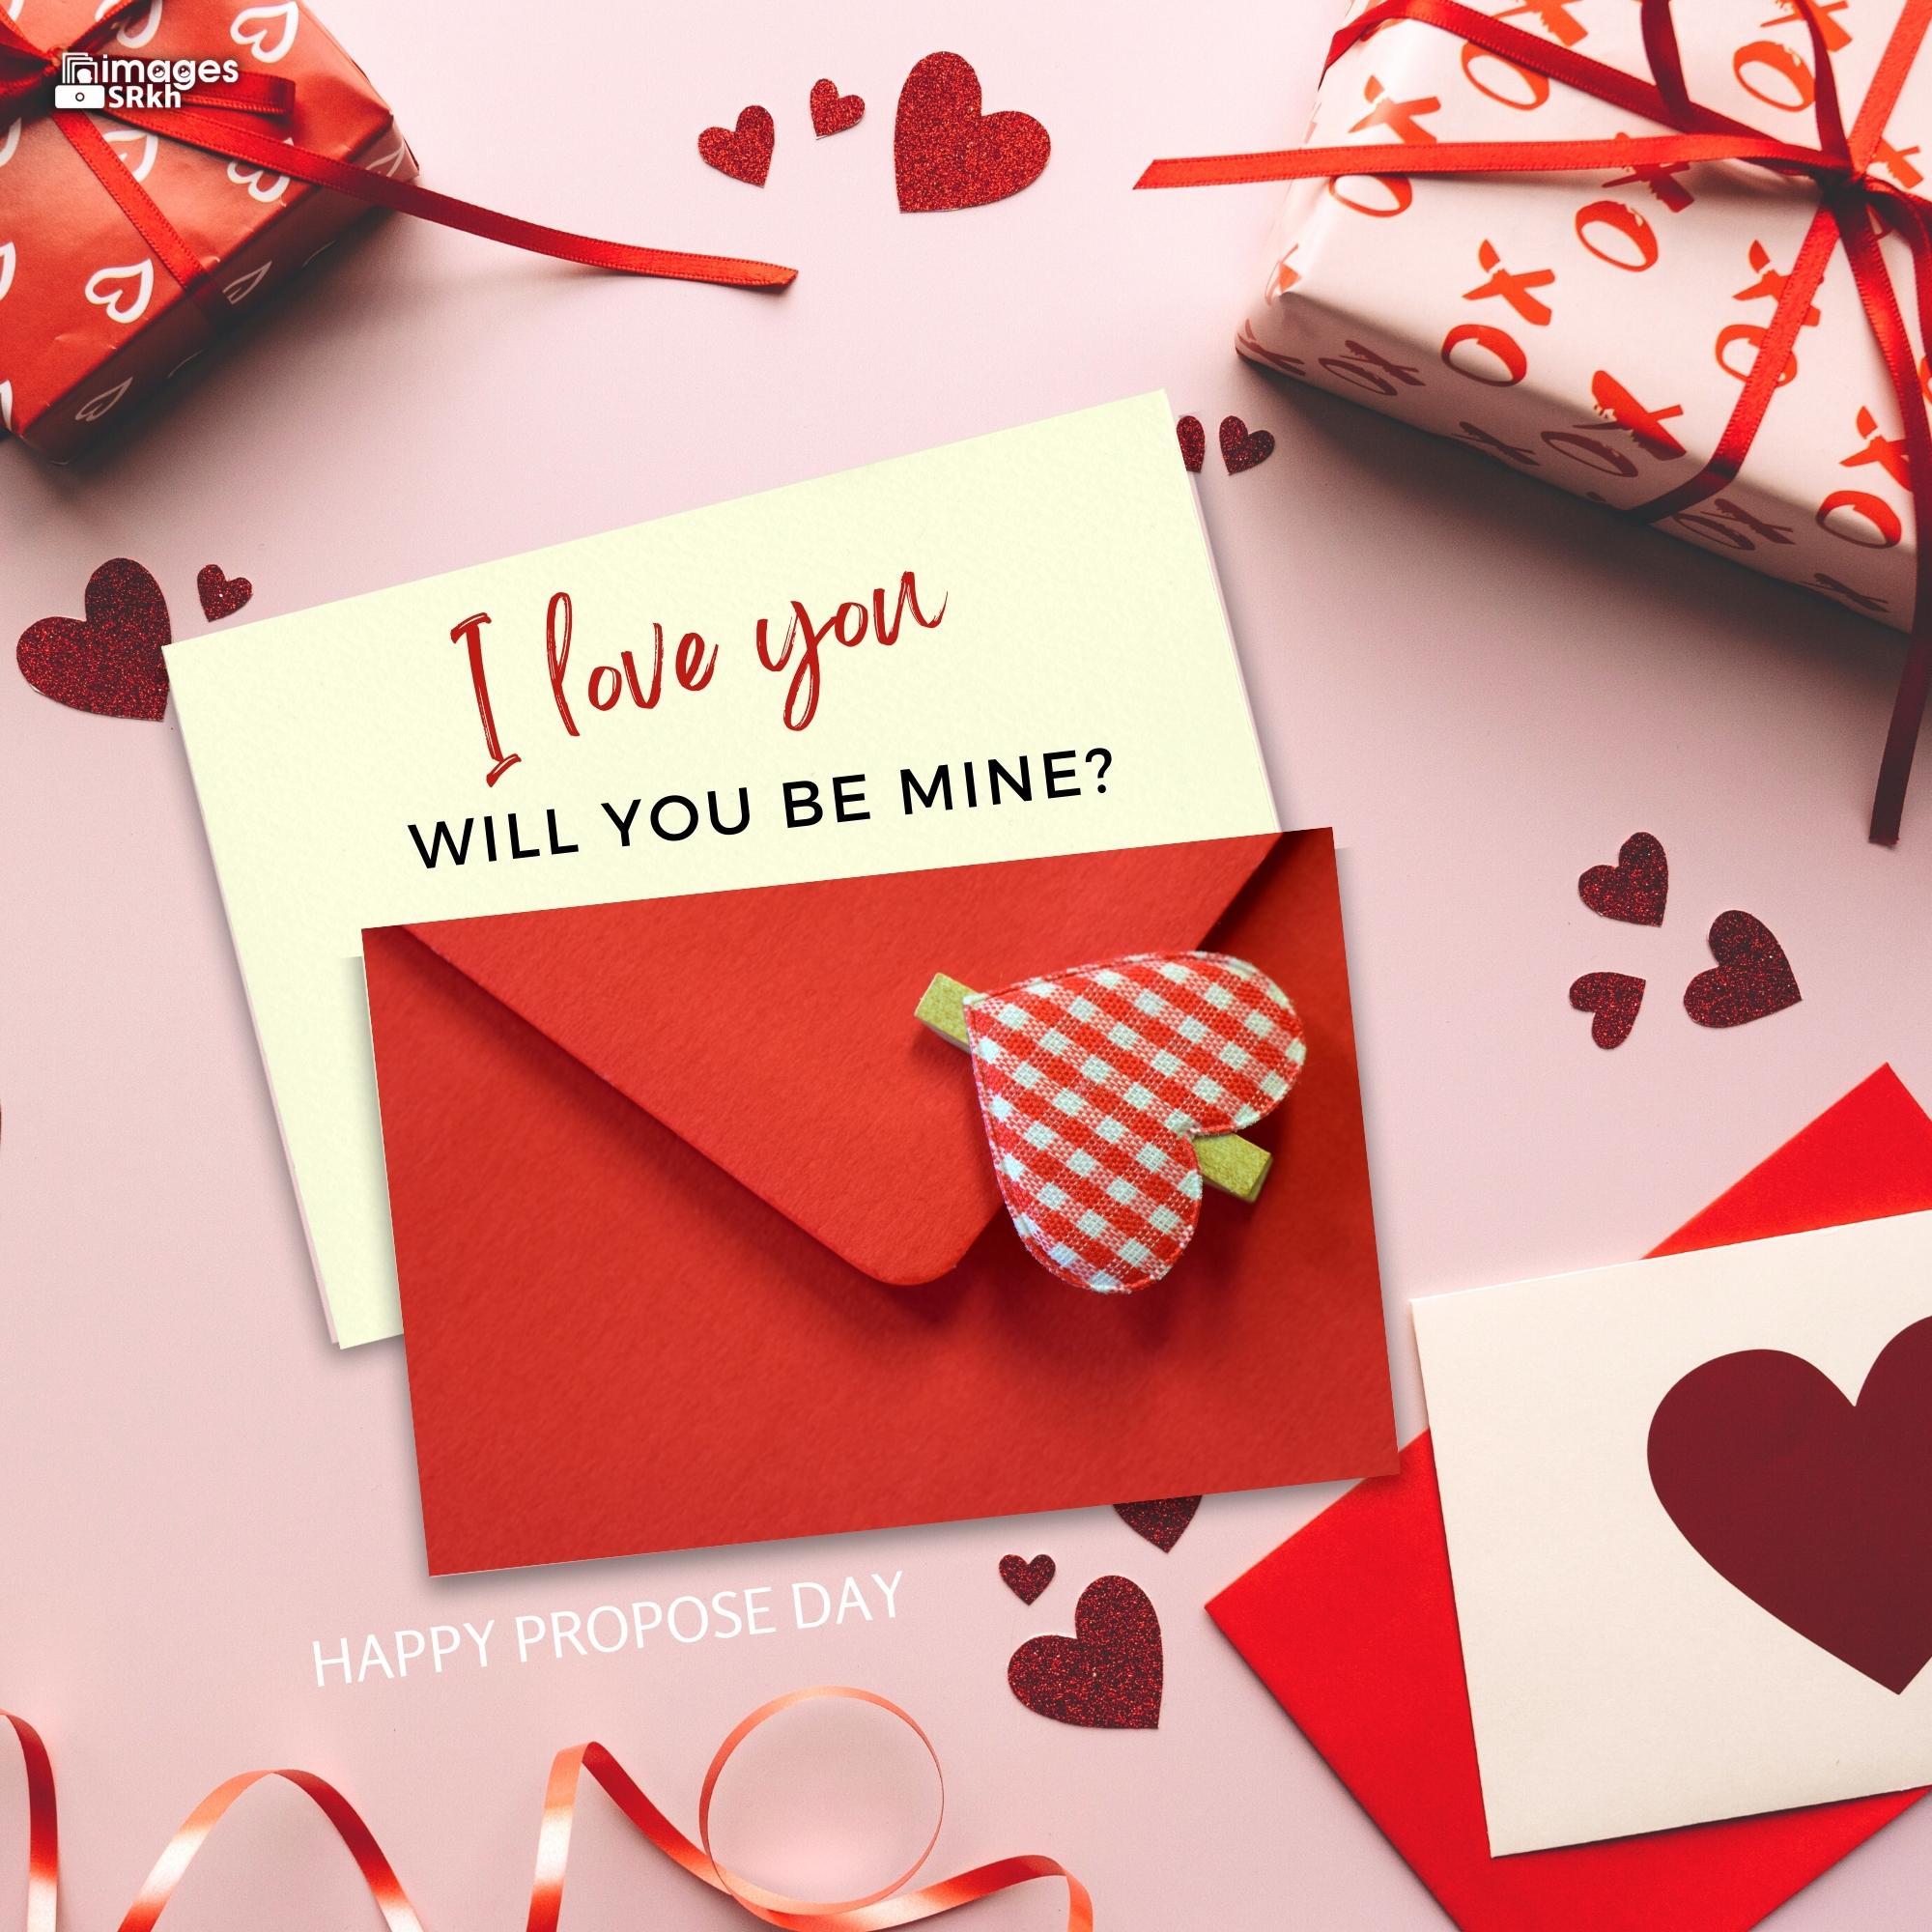 Happy Propose Day Images | 447 | I love you will you be mine